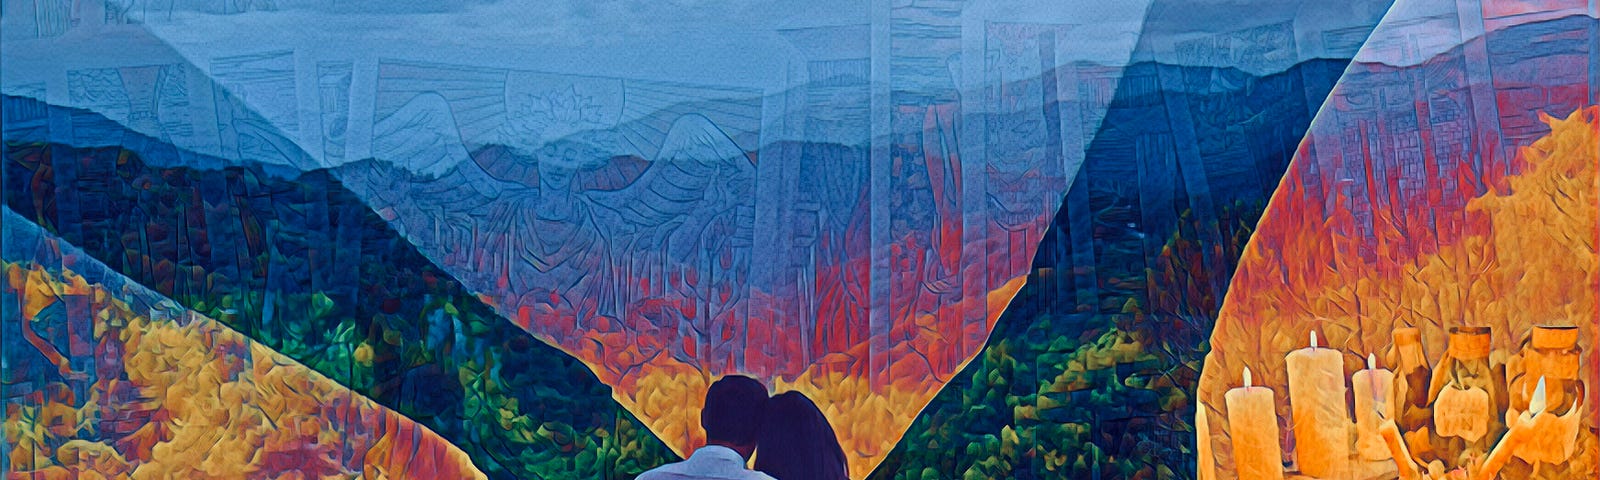 A back view of a seated man and woman clasping each other over images of mountains, candles, and tarot cards